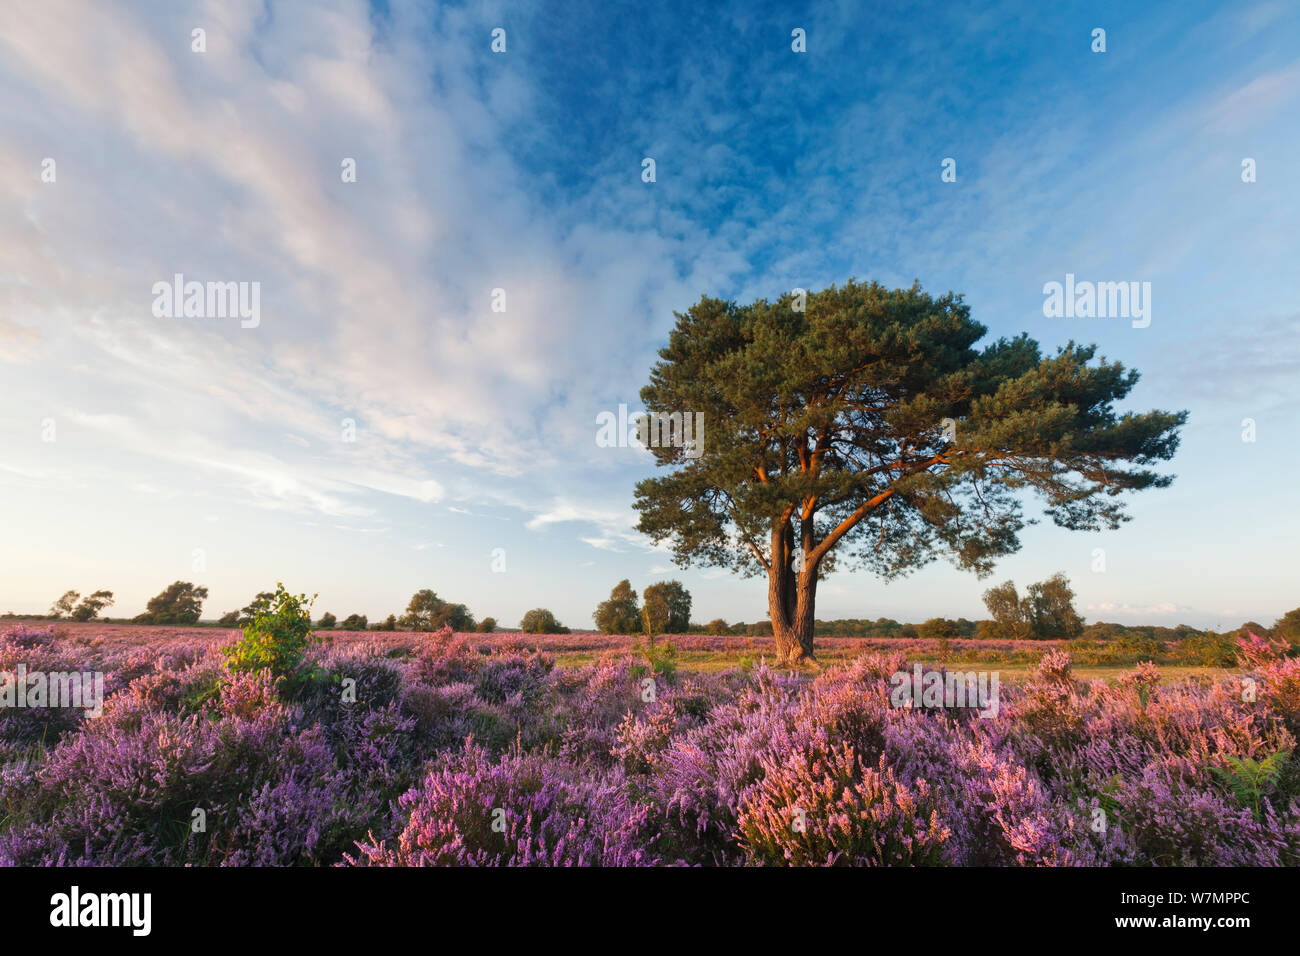 Ling (Calluna vulgaris) and Bell Heather (Erica cinerea) flowering on heathland with Scots Pine tree. Pig Bush, Beaulieu, New Forest National Park, Hampshire, England, UK, August. Stock Photo